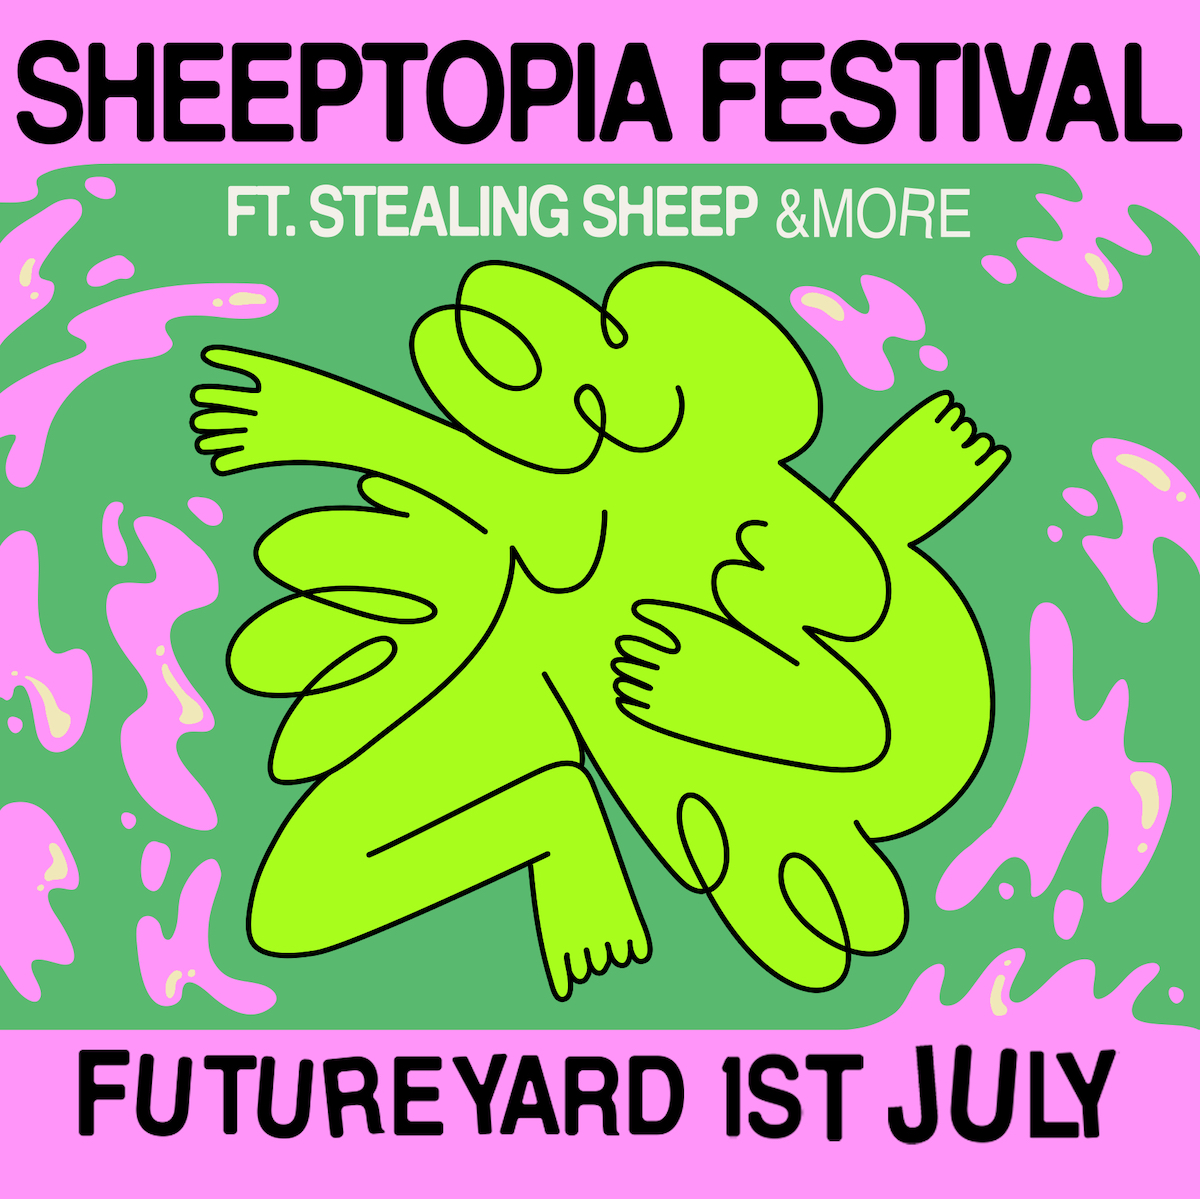 SHEEPTOPIA @stealingsheep bring their all-day festival to our outside stage on Saturday 1st July. An event curated by themselves and featuring some of the UK’s most significant female and non-binary artists. Limited number of early bird tickets on sale! ⇨ bit.ly/sheeptopiaFY